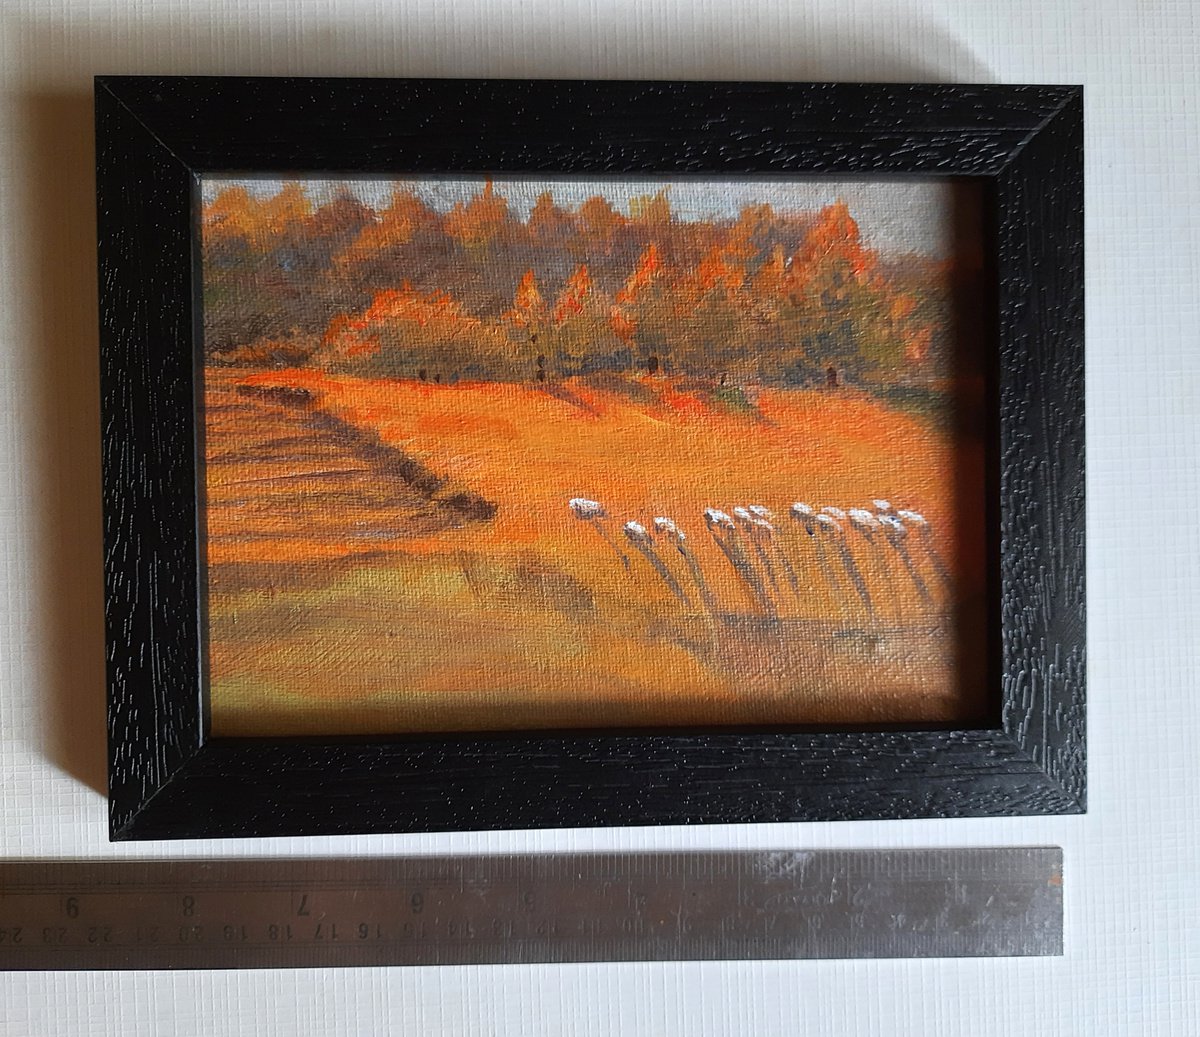 Miniature Sunset Landscape Sunset meadow Painting 5x 7 by Asha Shenoy